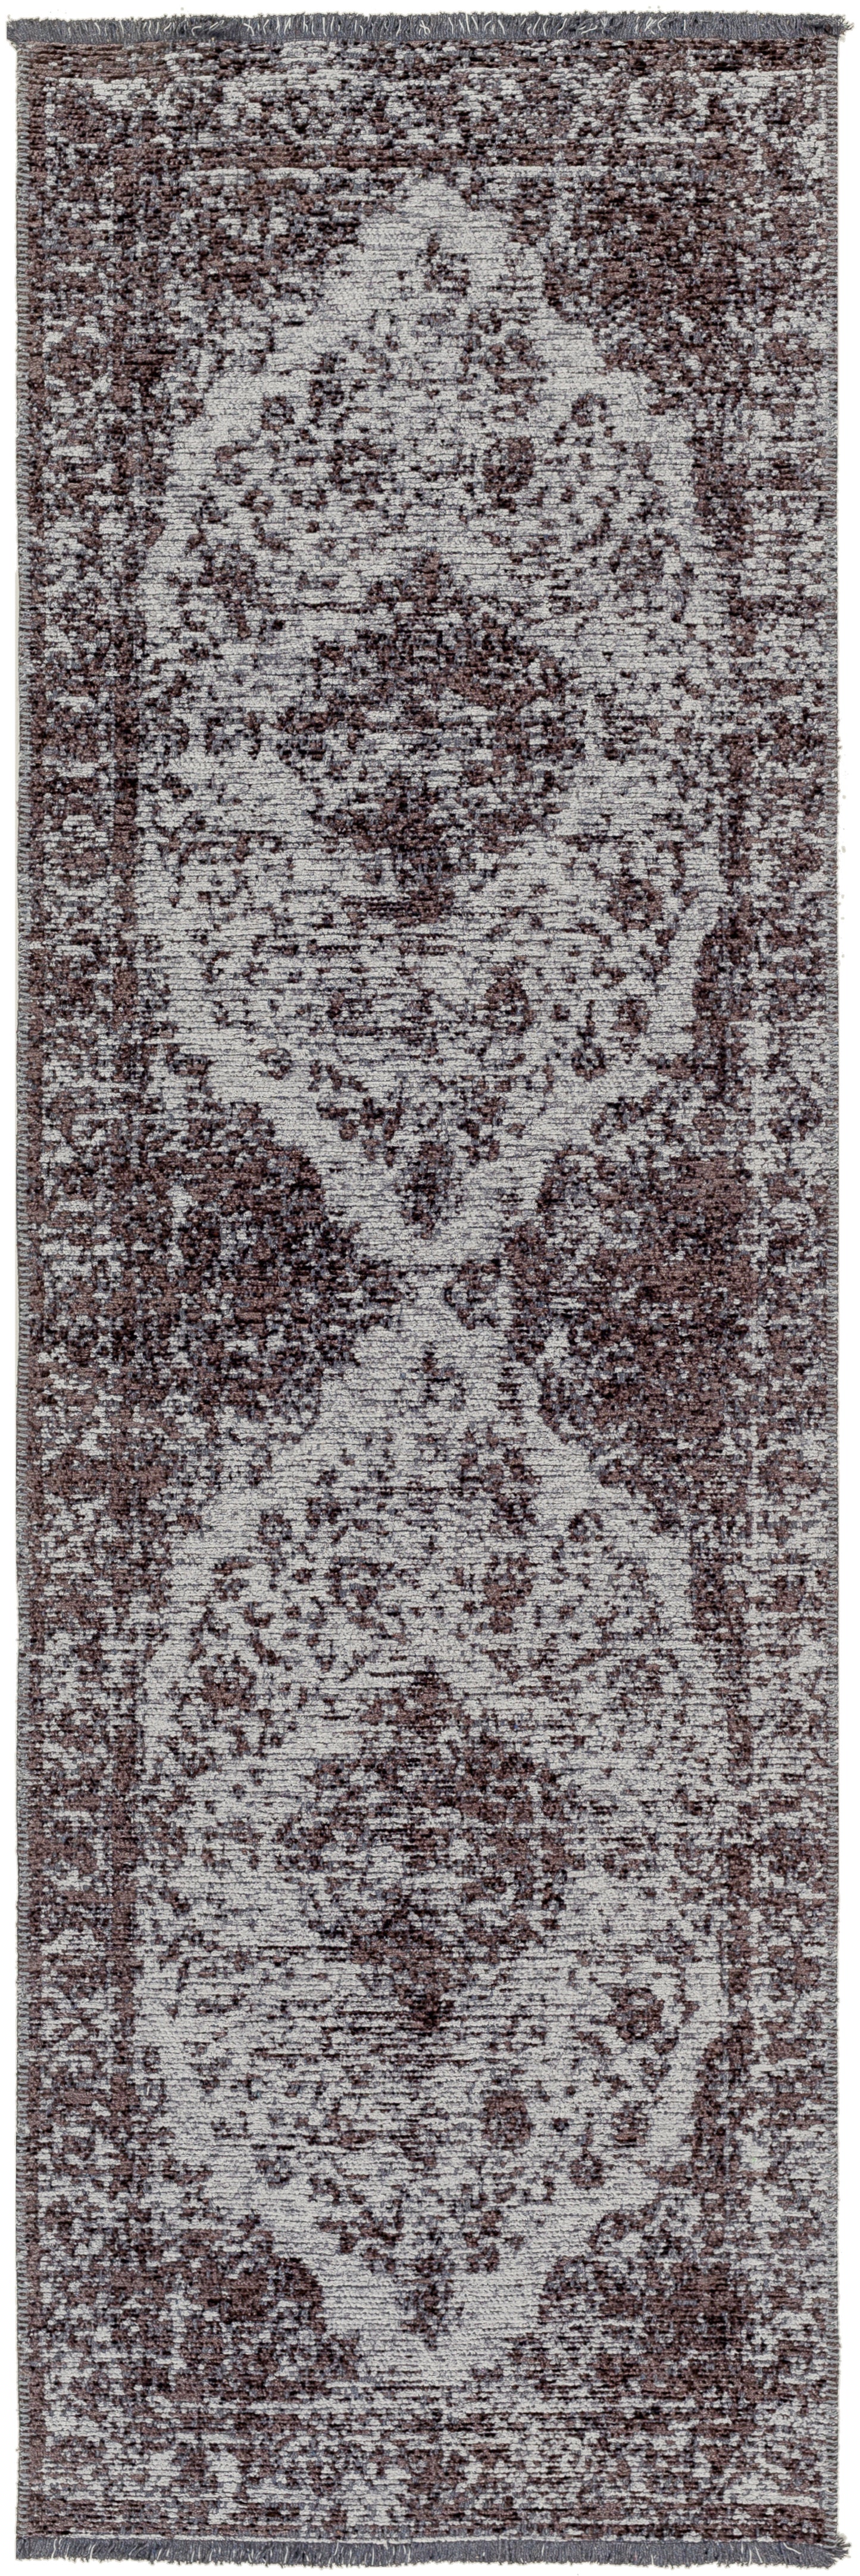 Toscana 30732 Machine Woven Synthetic Blend Indoor Area Rug by Surya Rugs | Area Rug